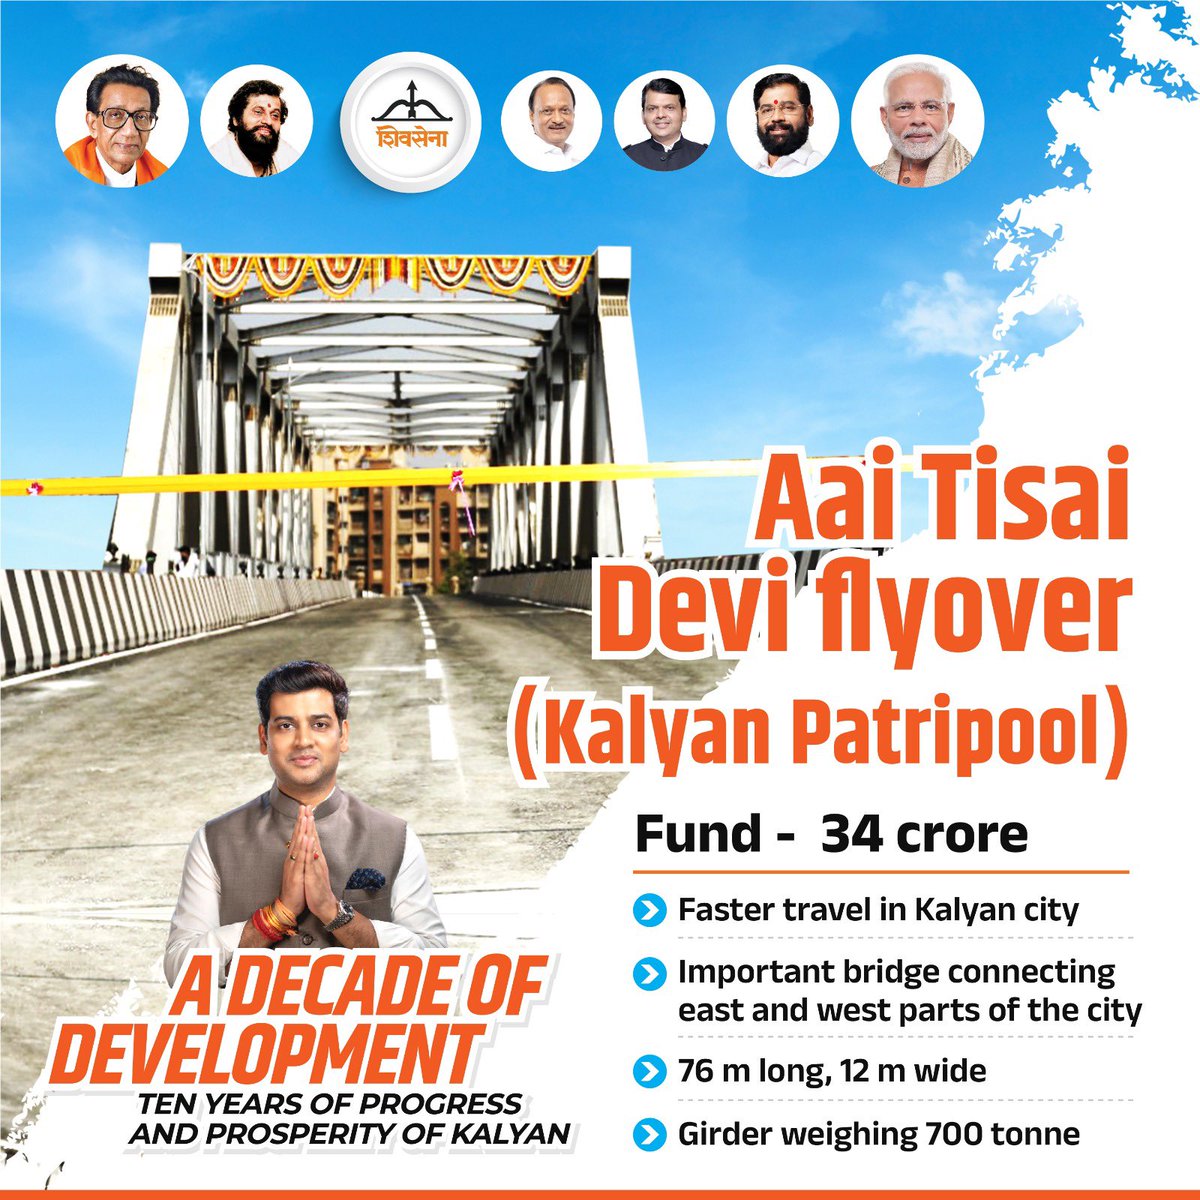 Aai Tisai Devi flyover, also known as, Patripool is an important bridge connecting the eastern and western sides of Kalyan city. This bridge, constructed during British era, has been demolished and reconstructed using modern methods. The newly built flyover is proving to be a…